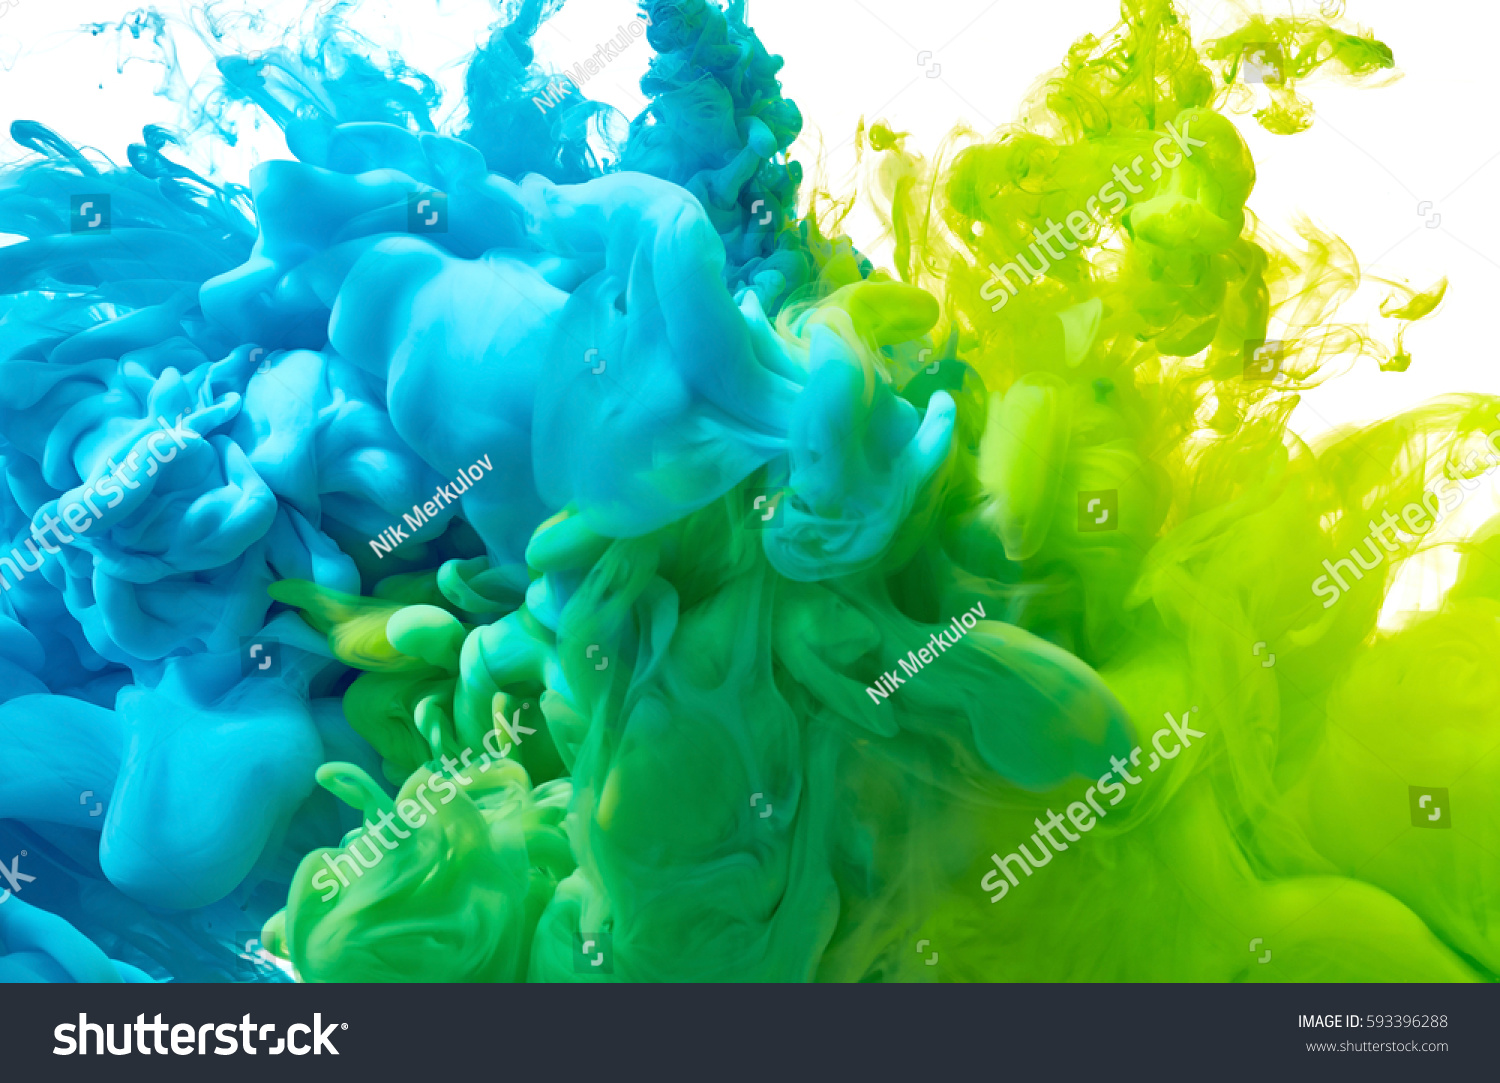 Blue and green paint splash isolated on white background #593396288